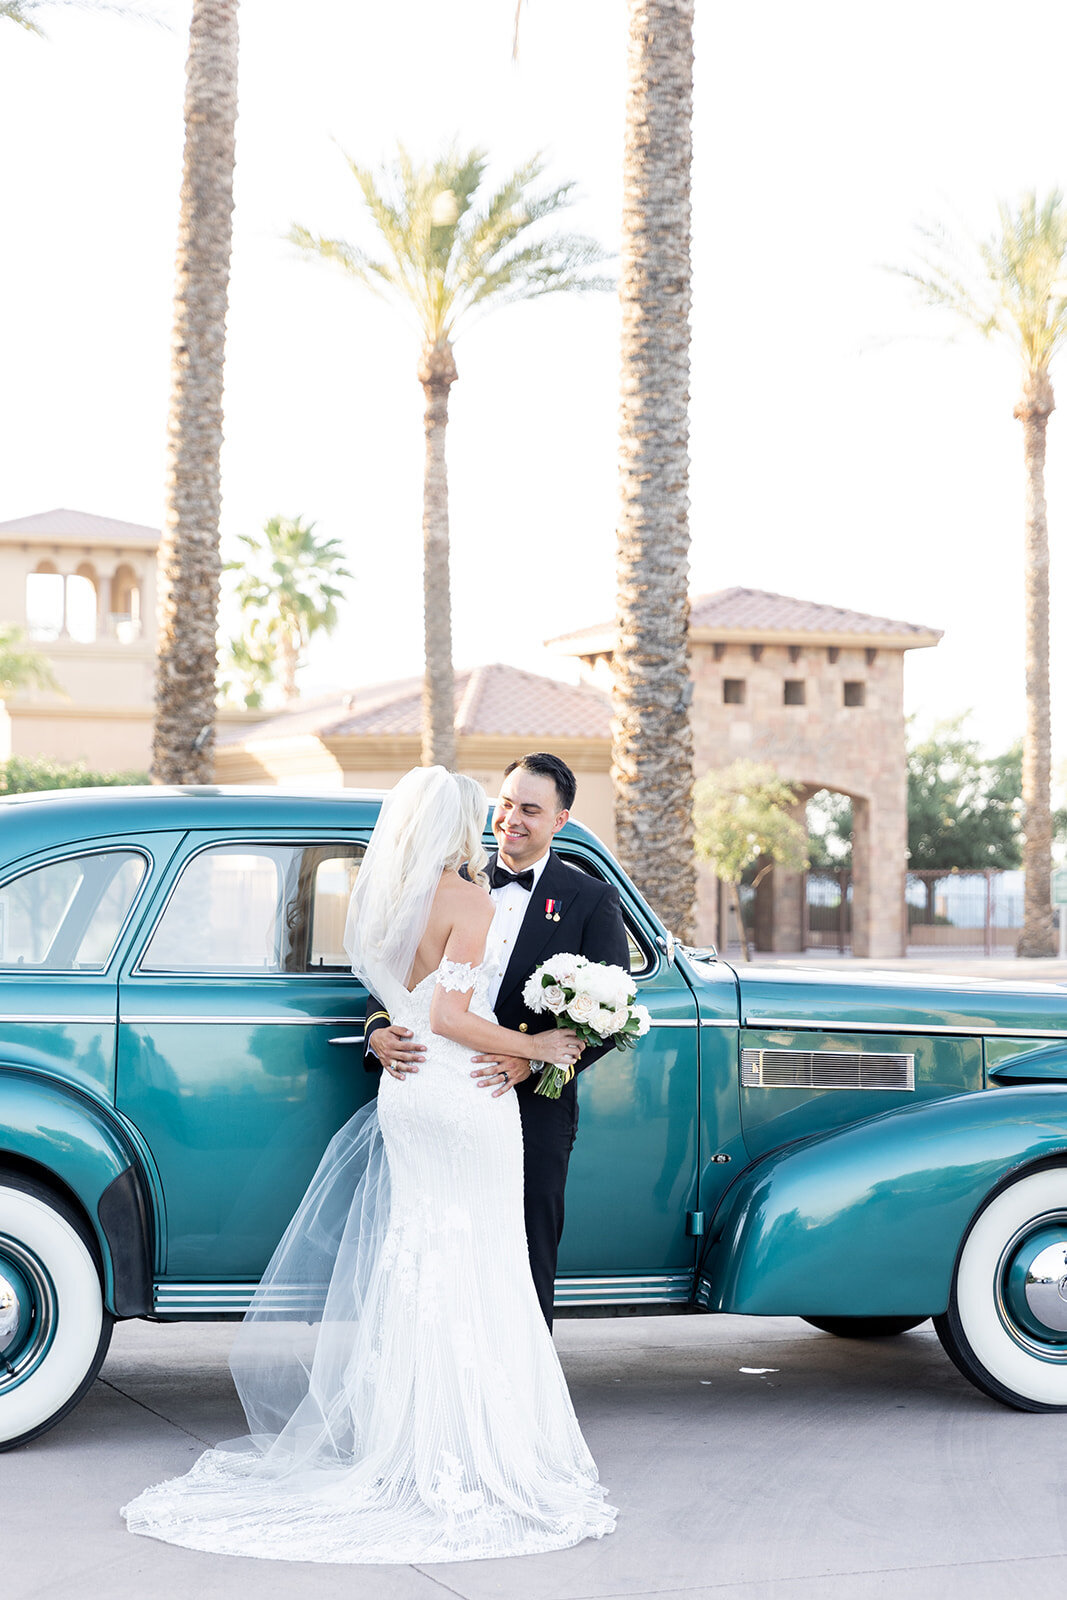 Karlie Colleen Photography - Holly & Ronnie Wedding - Seville Country Club - Gilbert Arizona-712